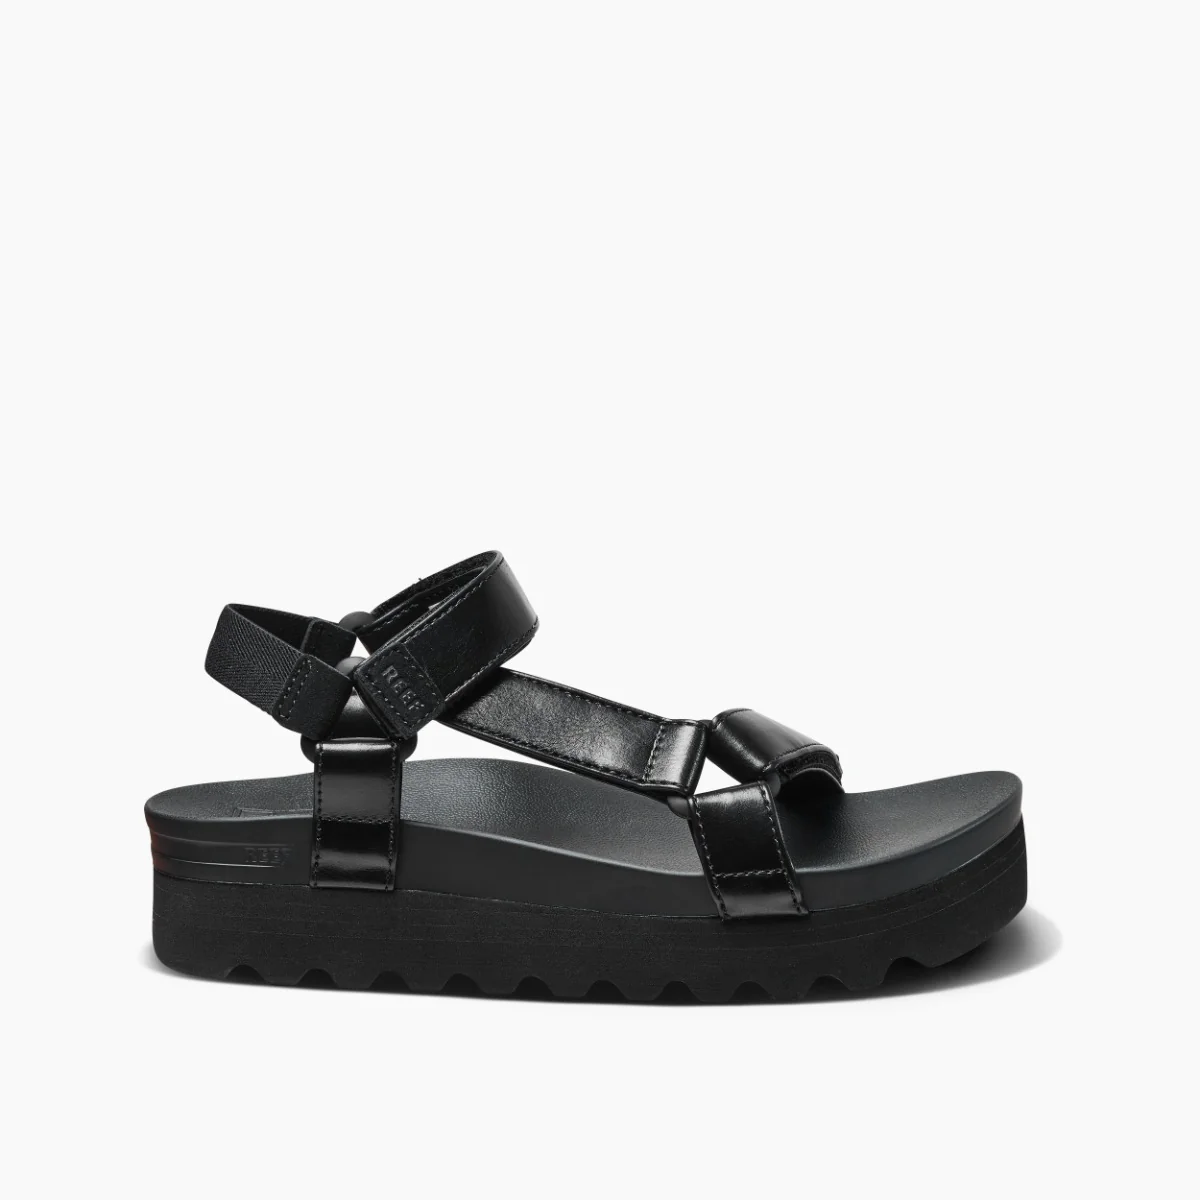 Women's Cushion Rem Hi Sandals in Coco Black side view